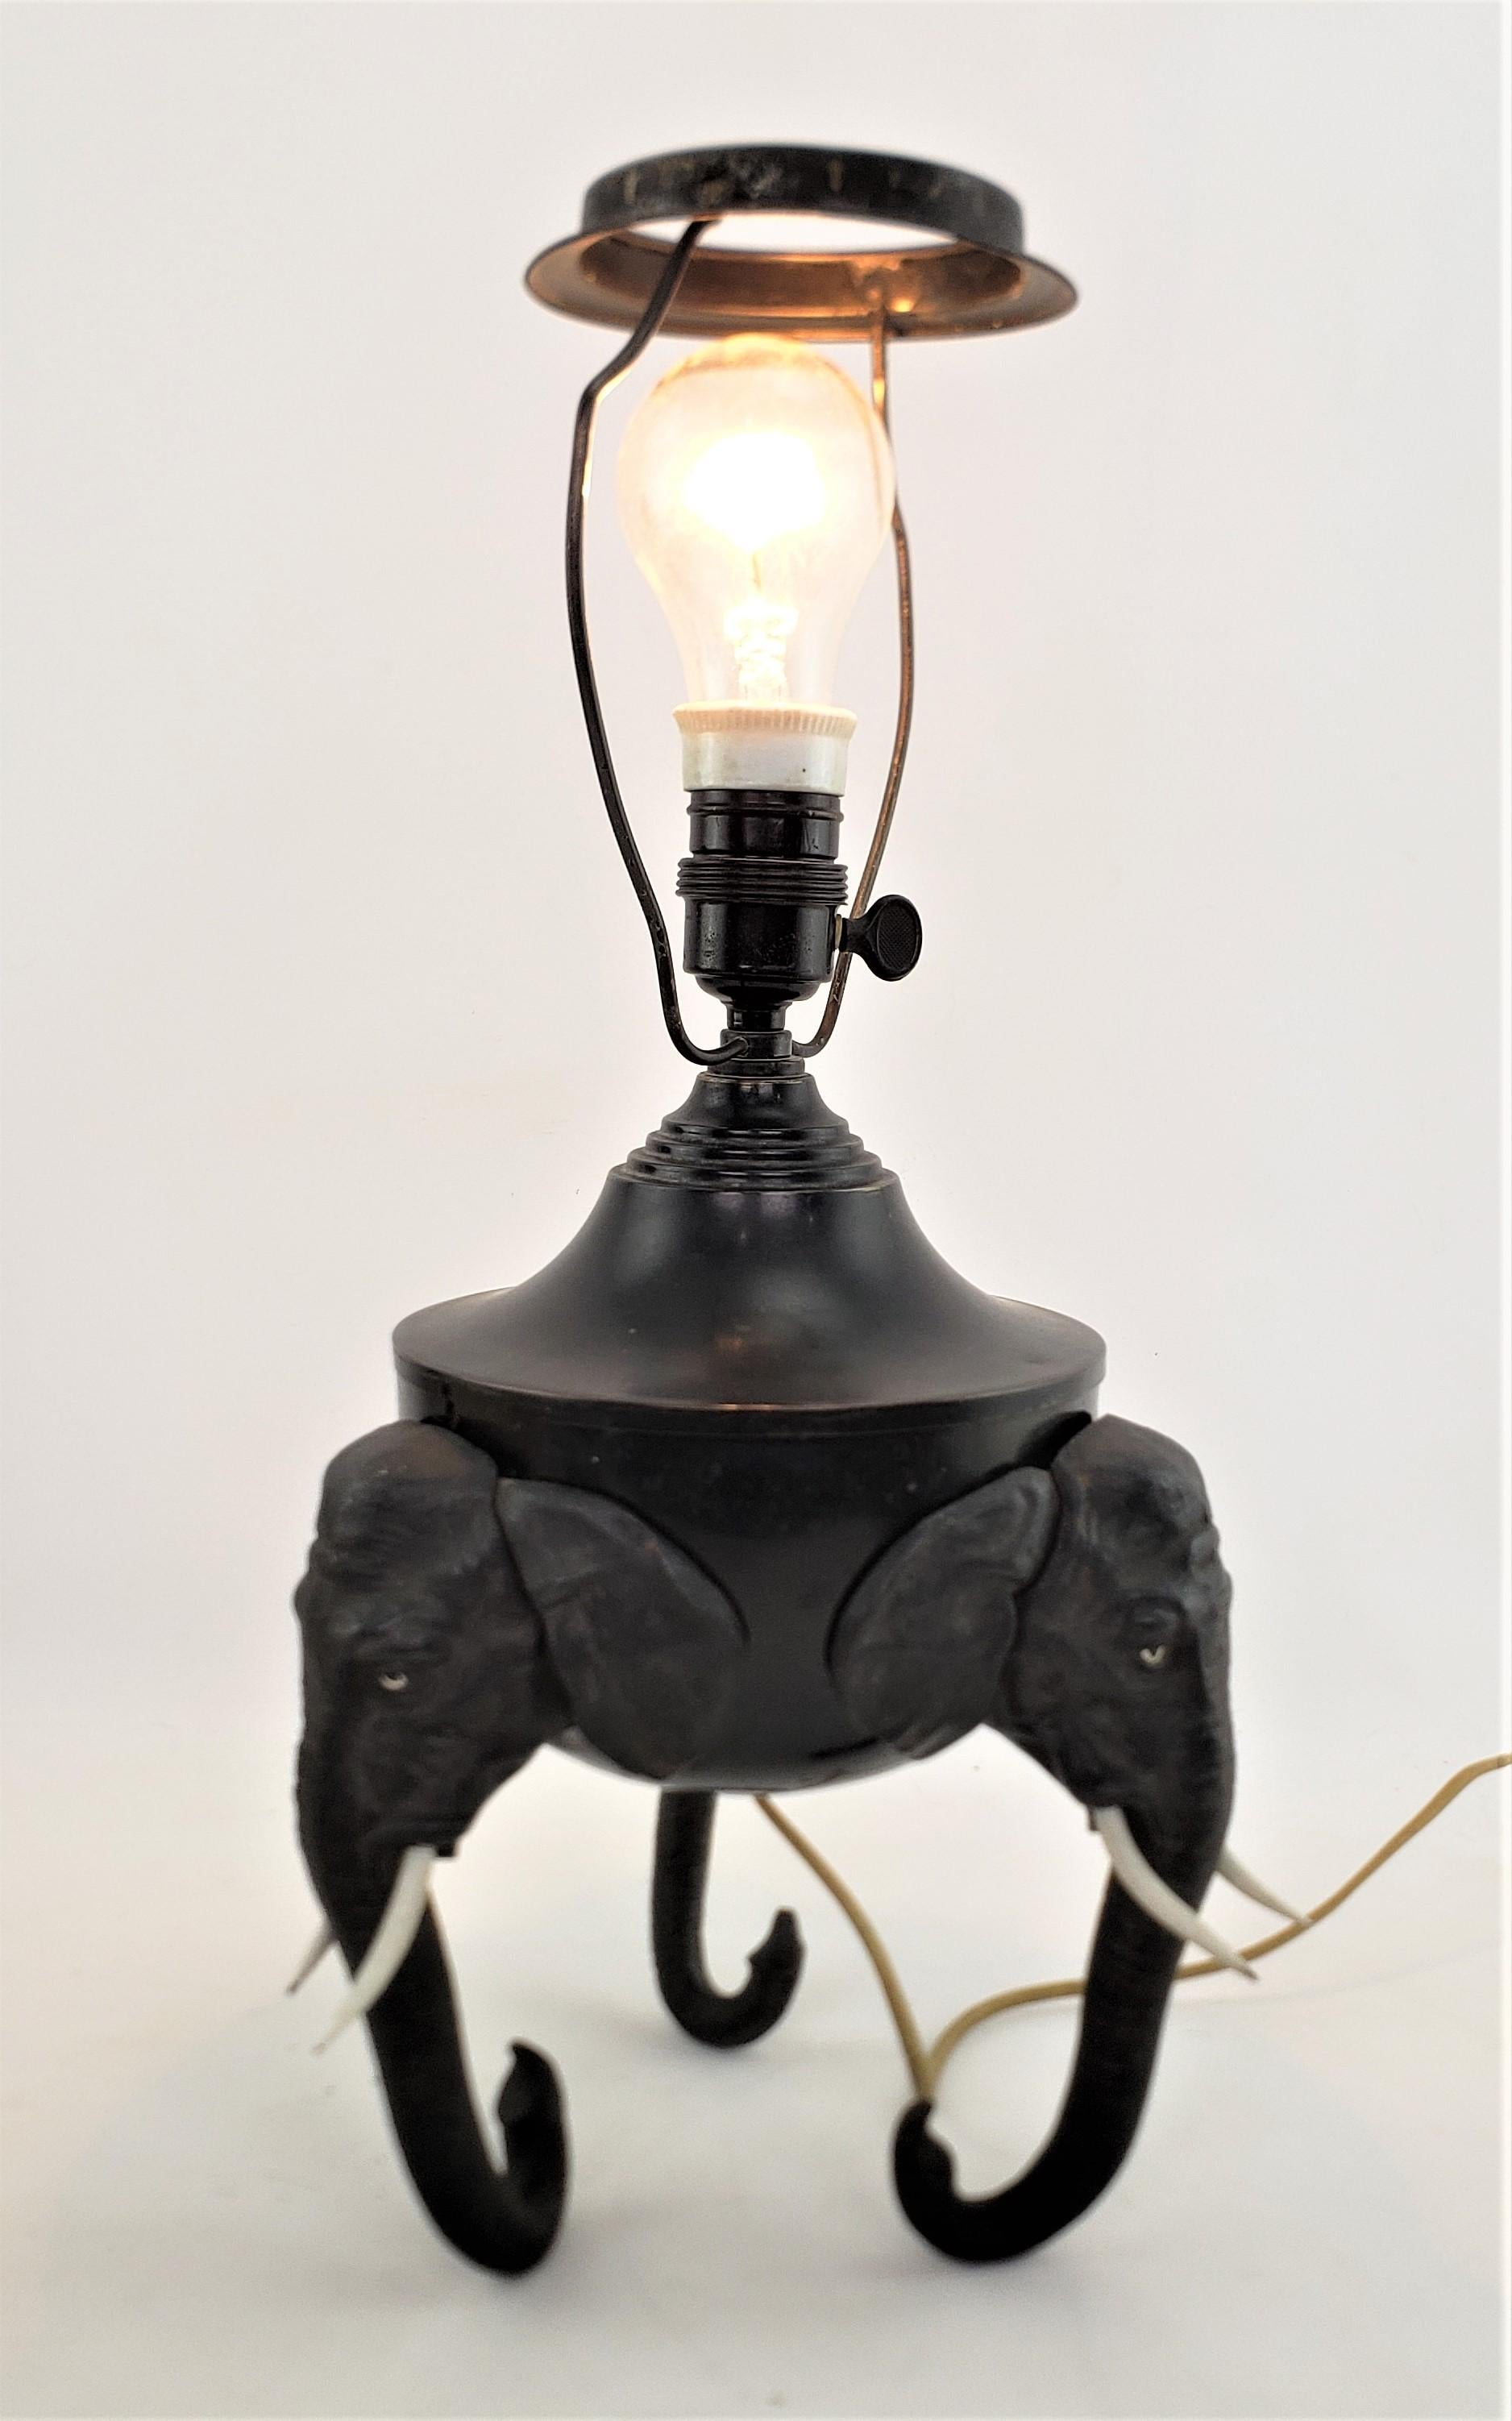 Antique Art Deco Cast & Patinated Spelter Table Lamp with Elephant Head Feet In Good Condition For Sale In Hamilton, Ontario